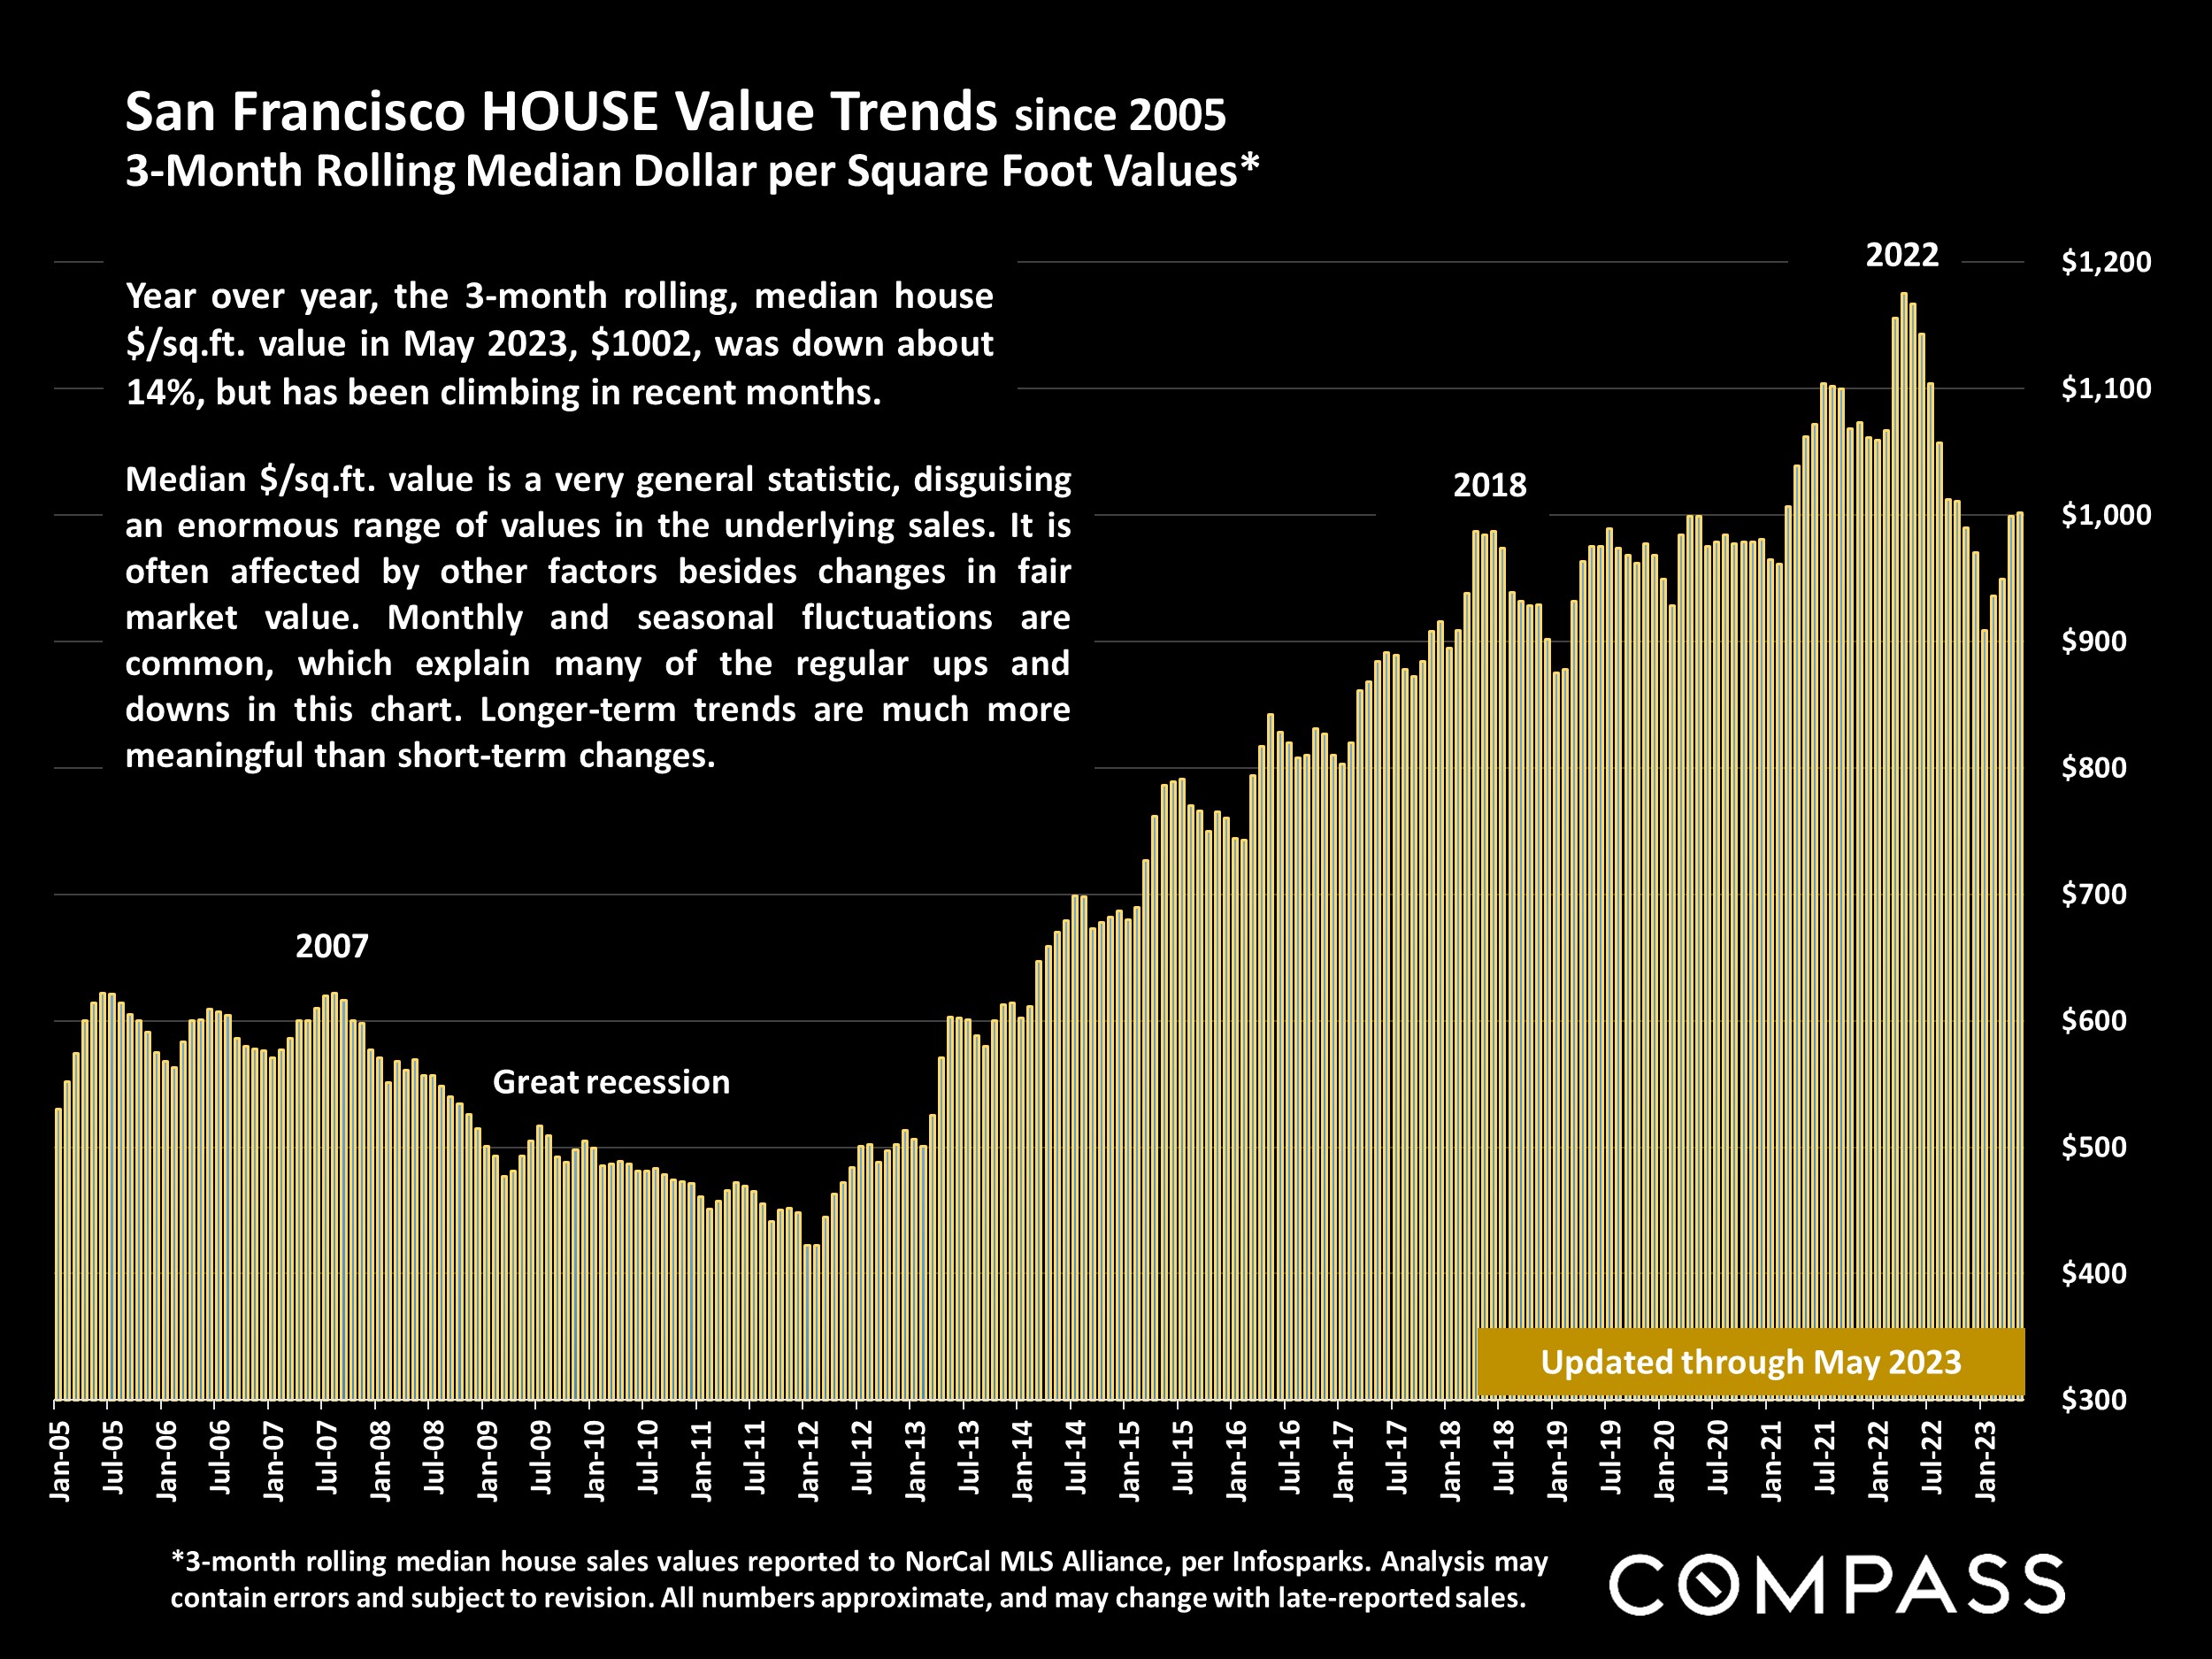 San Francisco HOUSE Value Trends since 2005